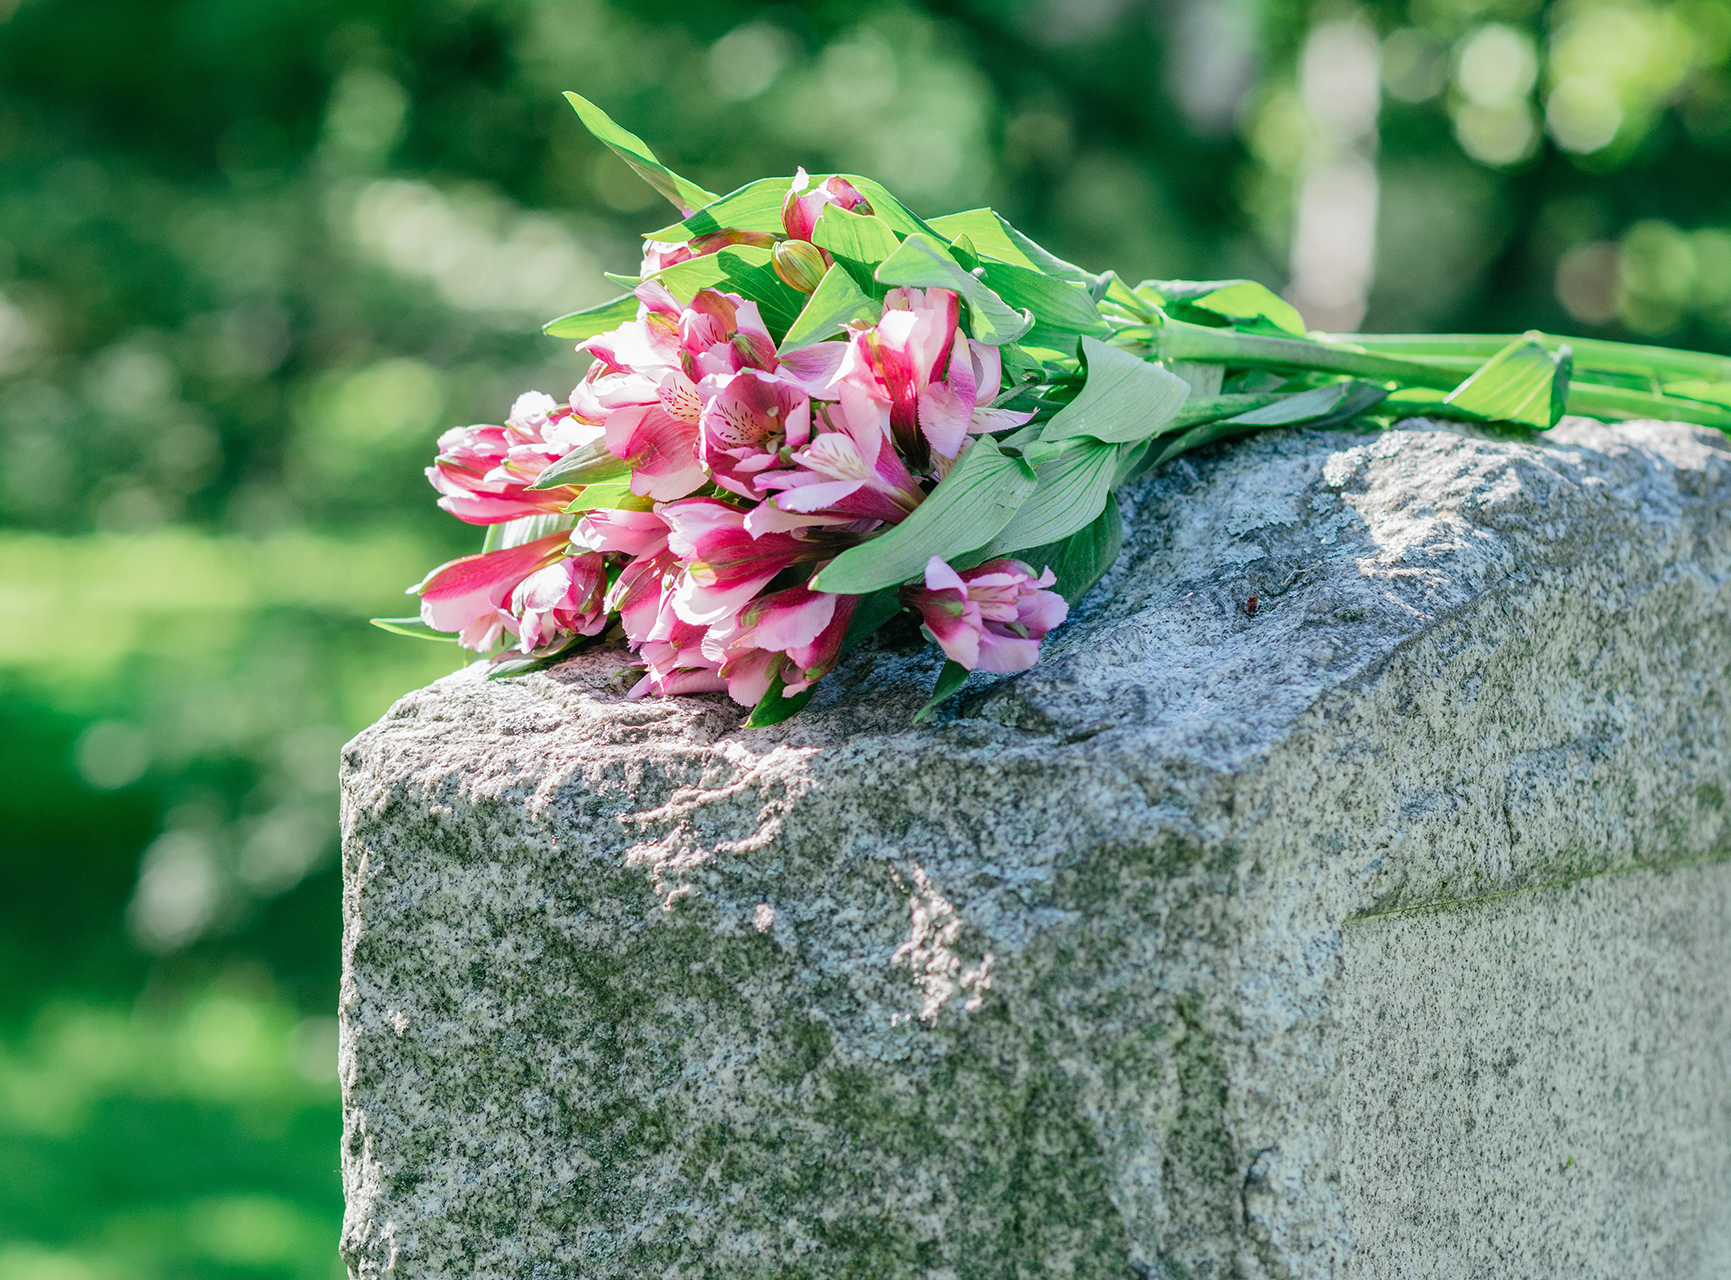 Grave Funeral Services and Cemetery Burial Plots available by Groesbeck Funeral Home in Limestone County TX